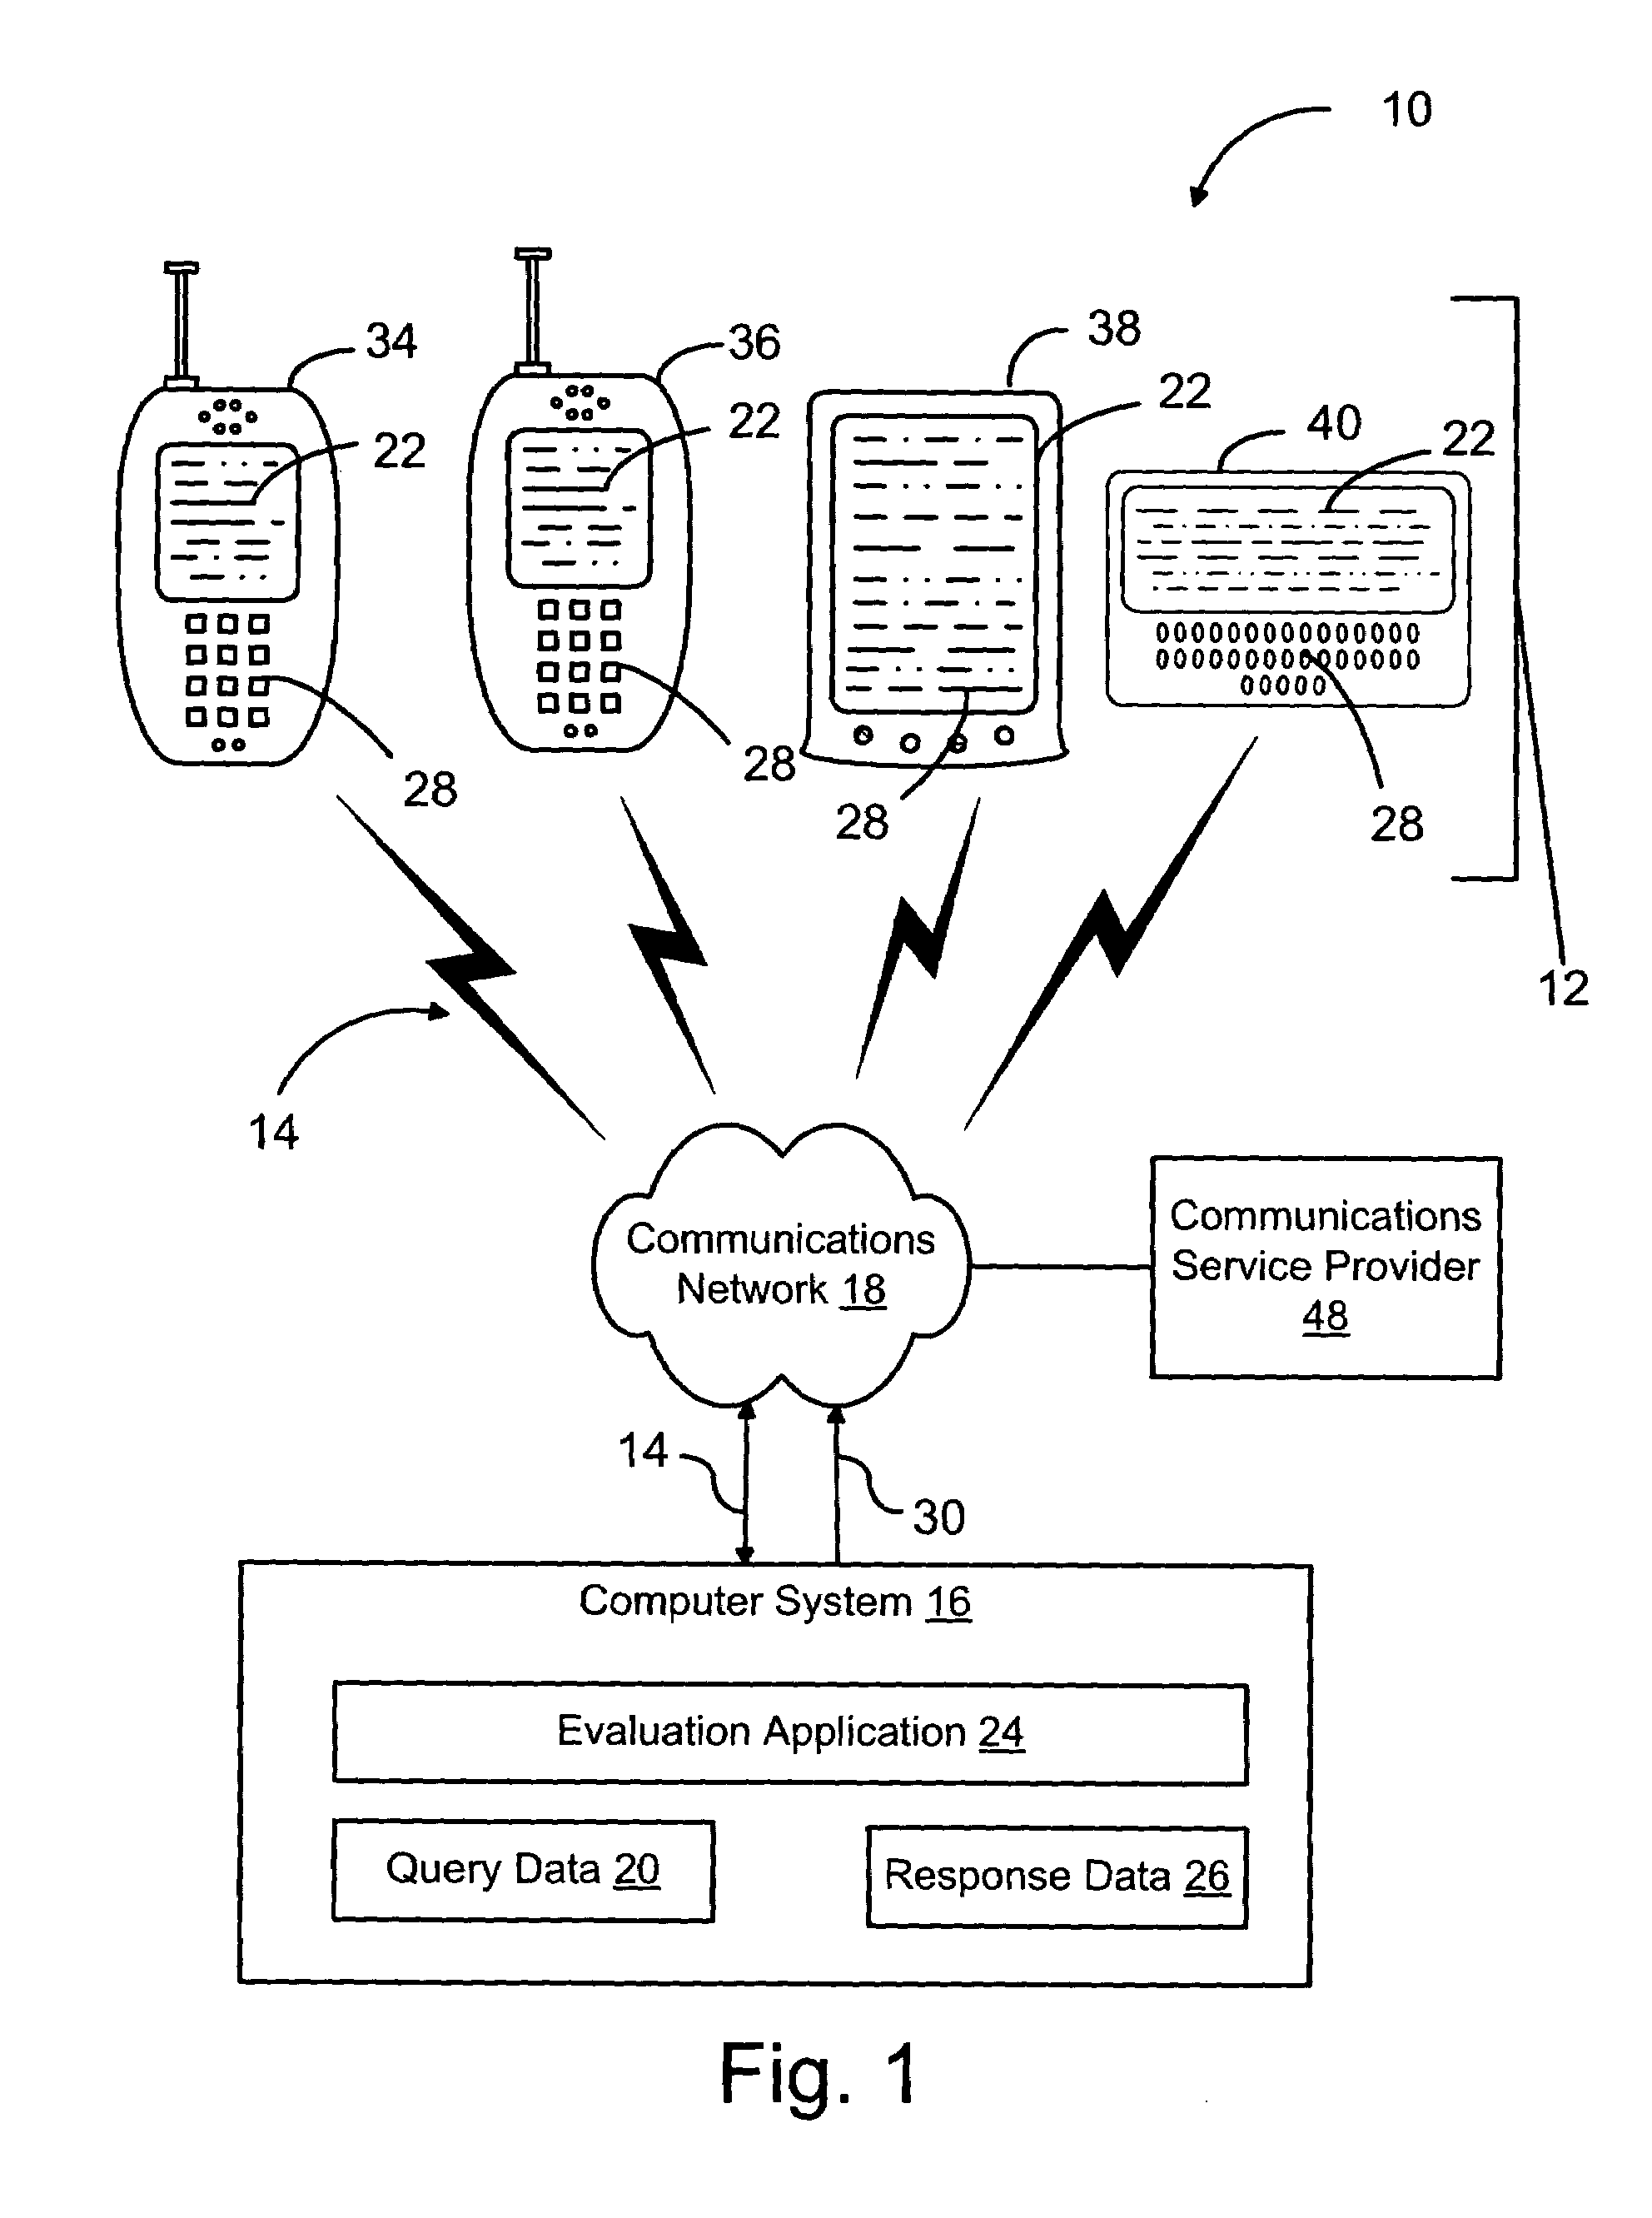 Systems, devices and methods for providing a reward based upon use of a mobile communications device